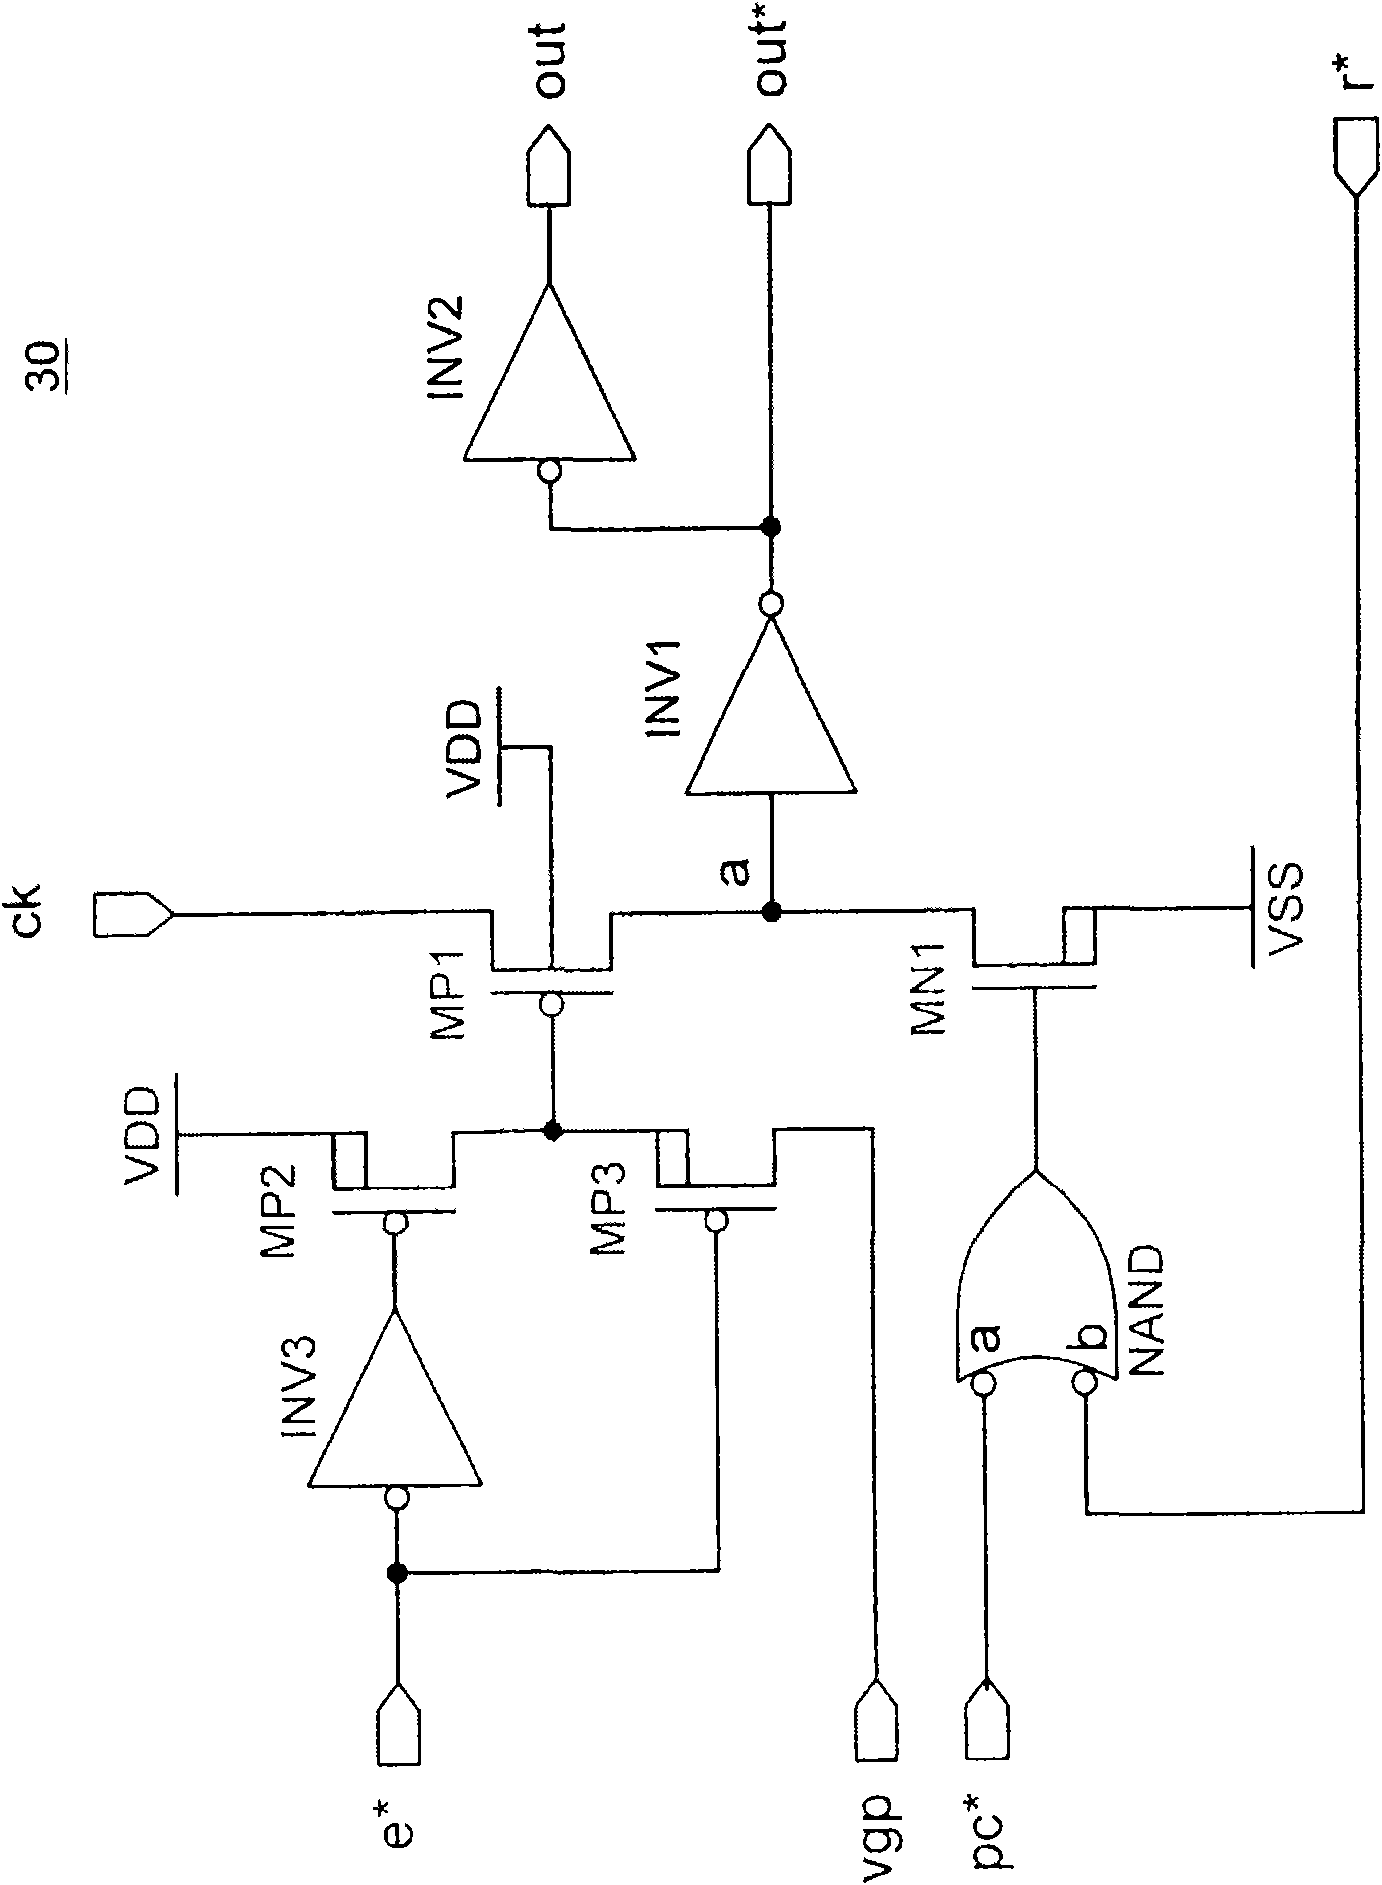 Shifter register for low power consumption application